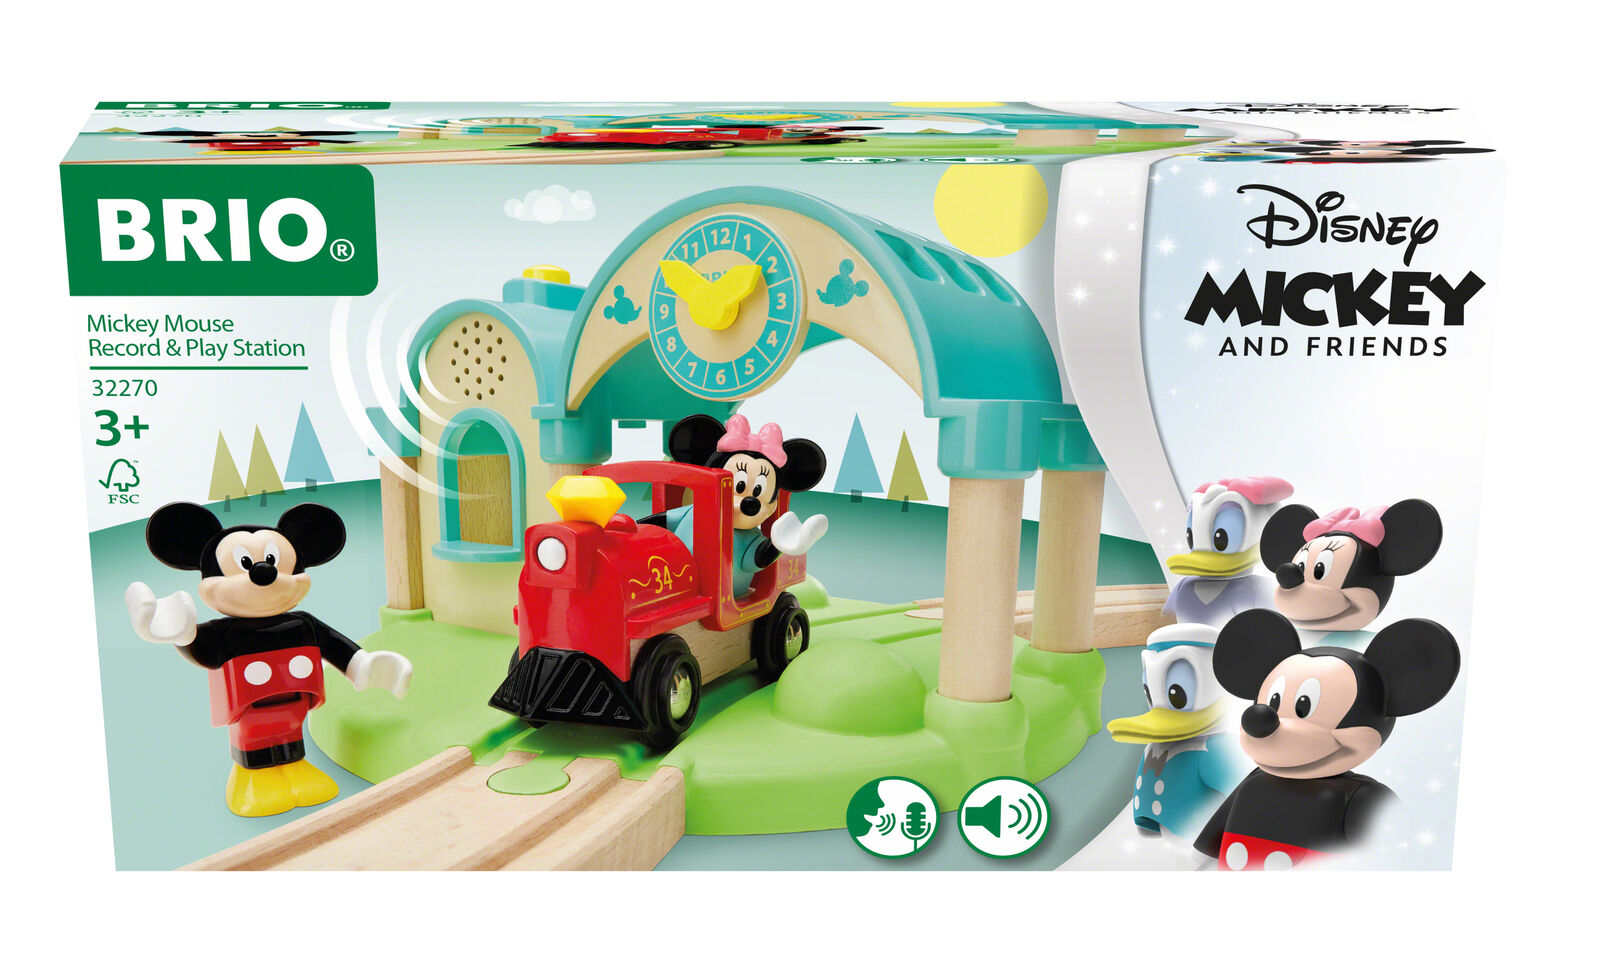 32270 BRIO Disney Mickey Mouse Record & Play Train Station Wooden Railway Age 3+